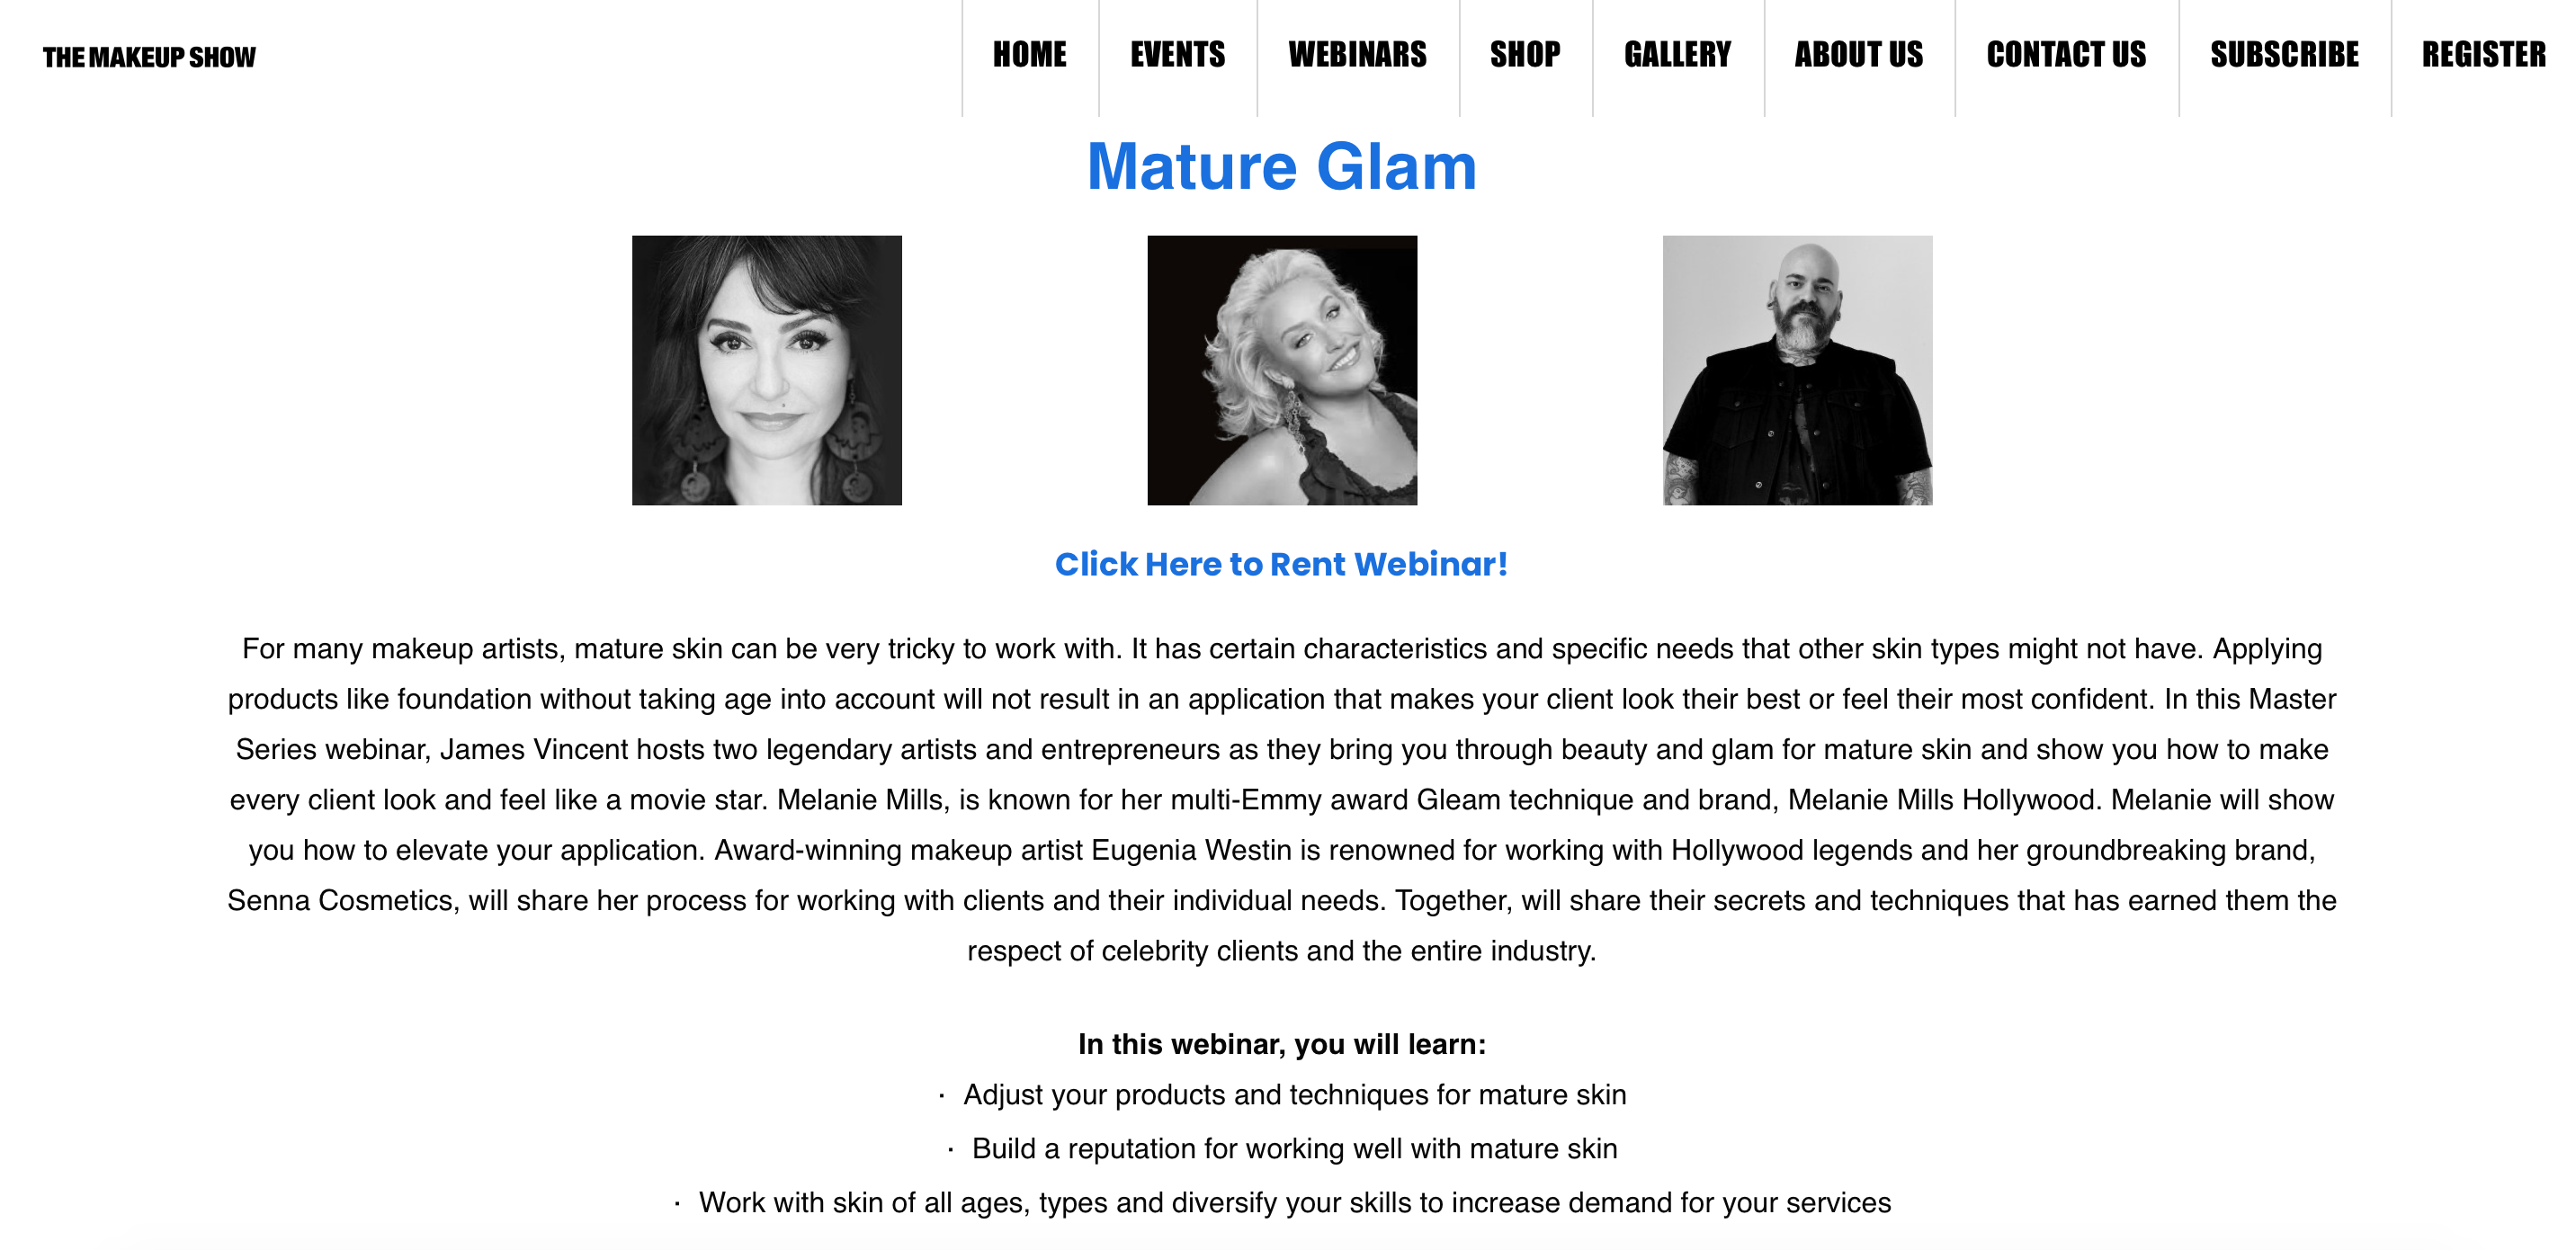 Learn Makeup At Home mature glam